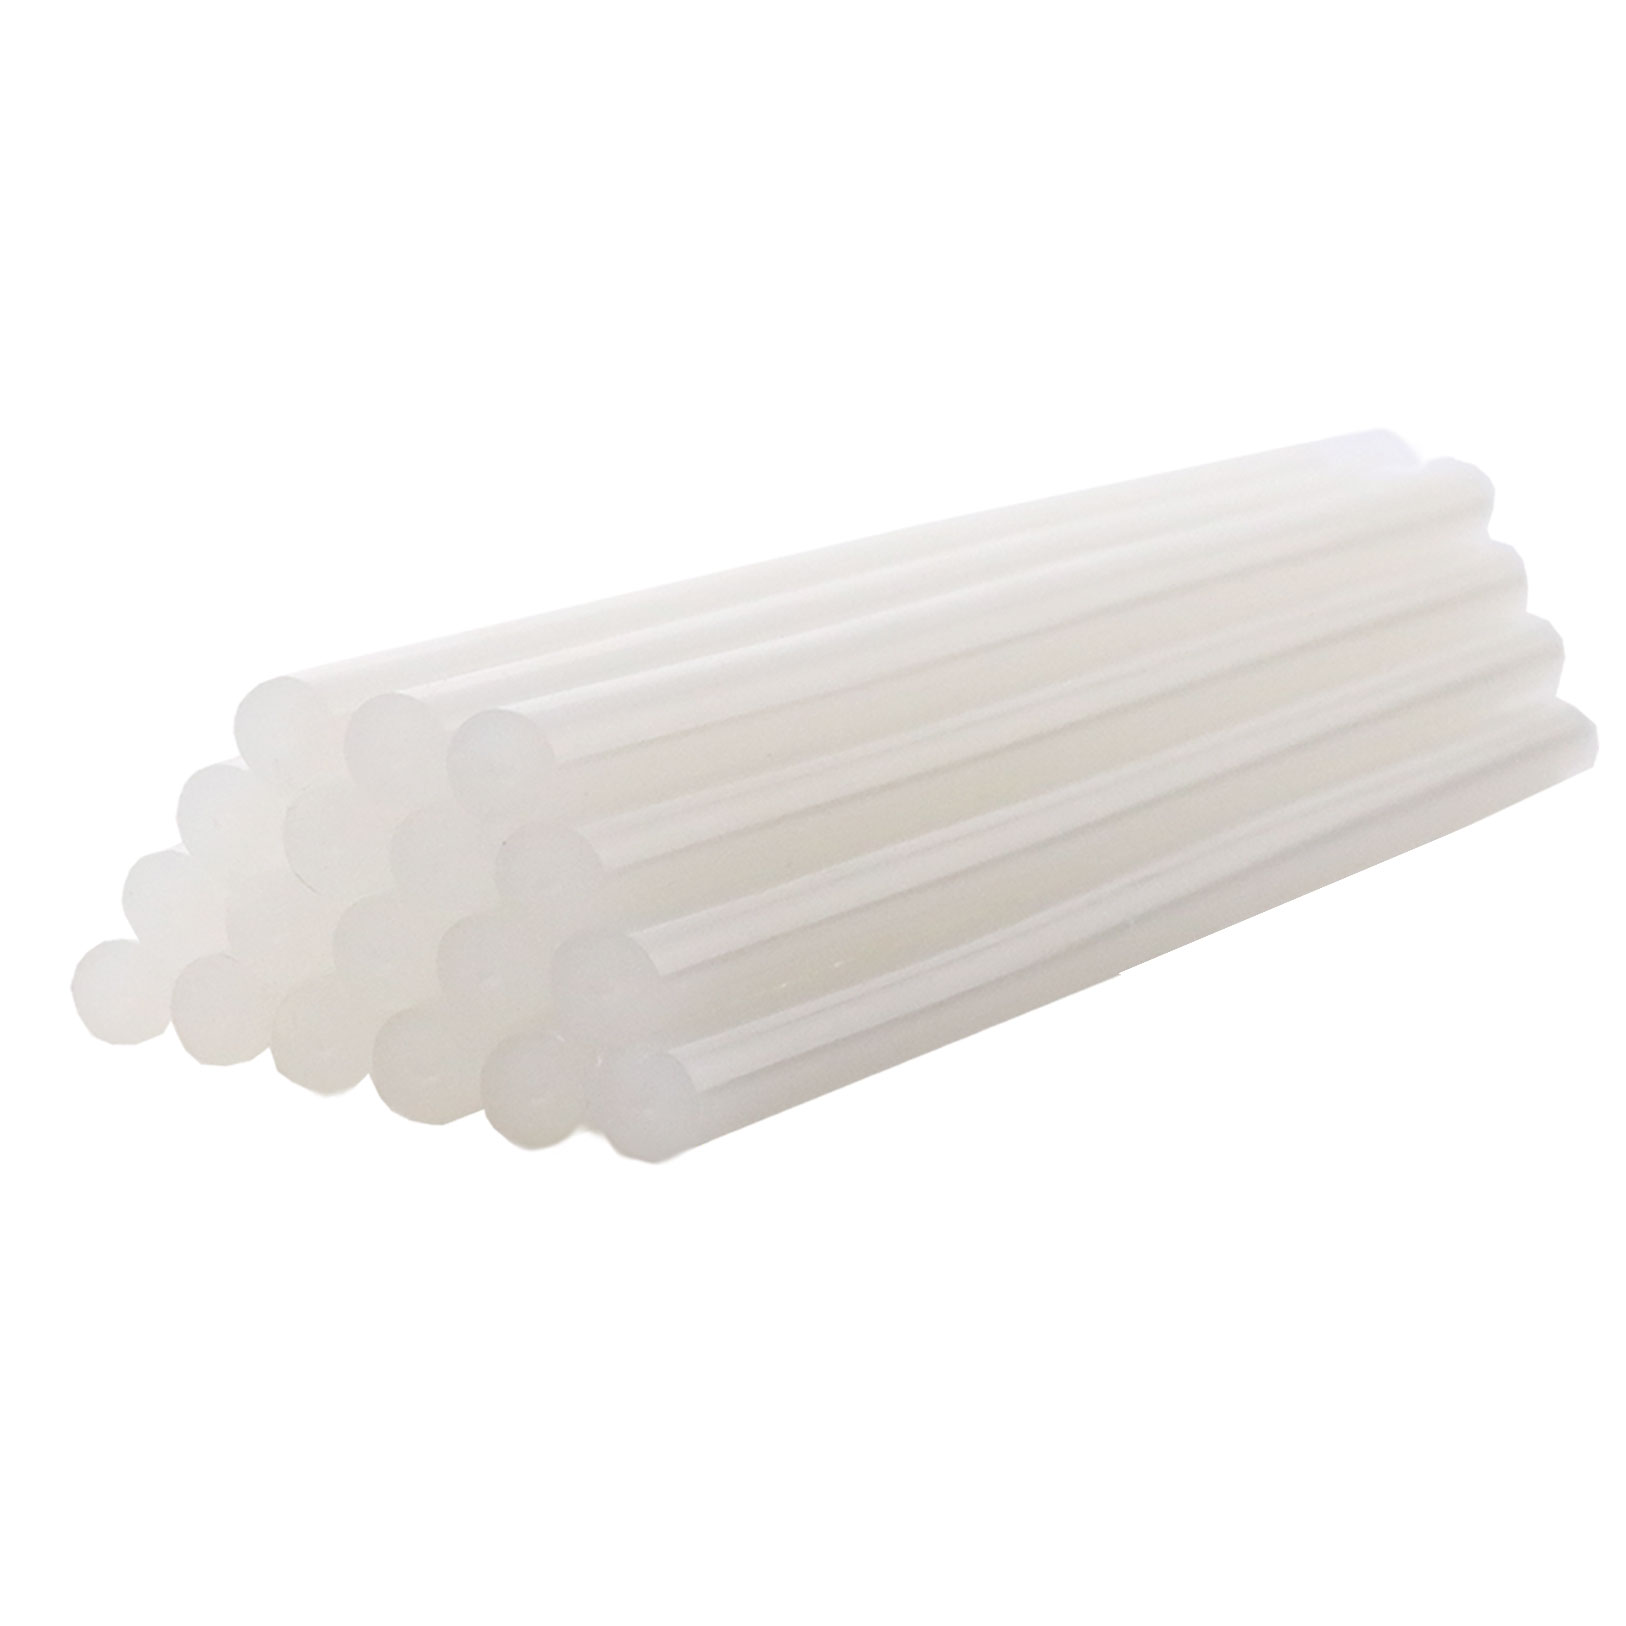 Large Glue Sticks, 30-Pack, White, .70-Ounce